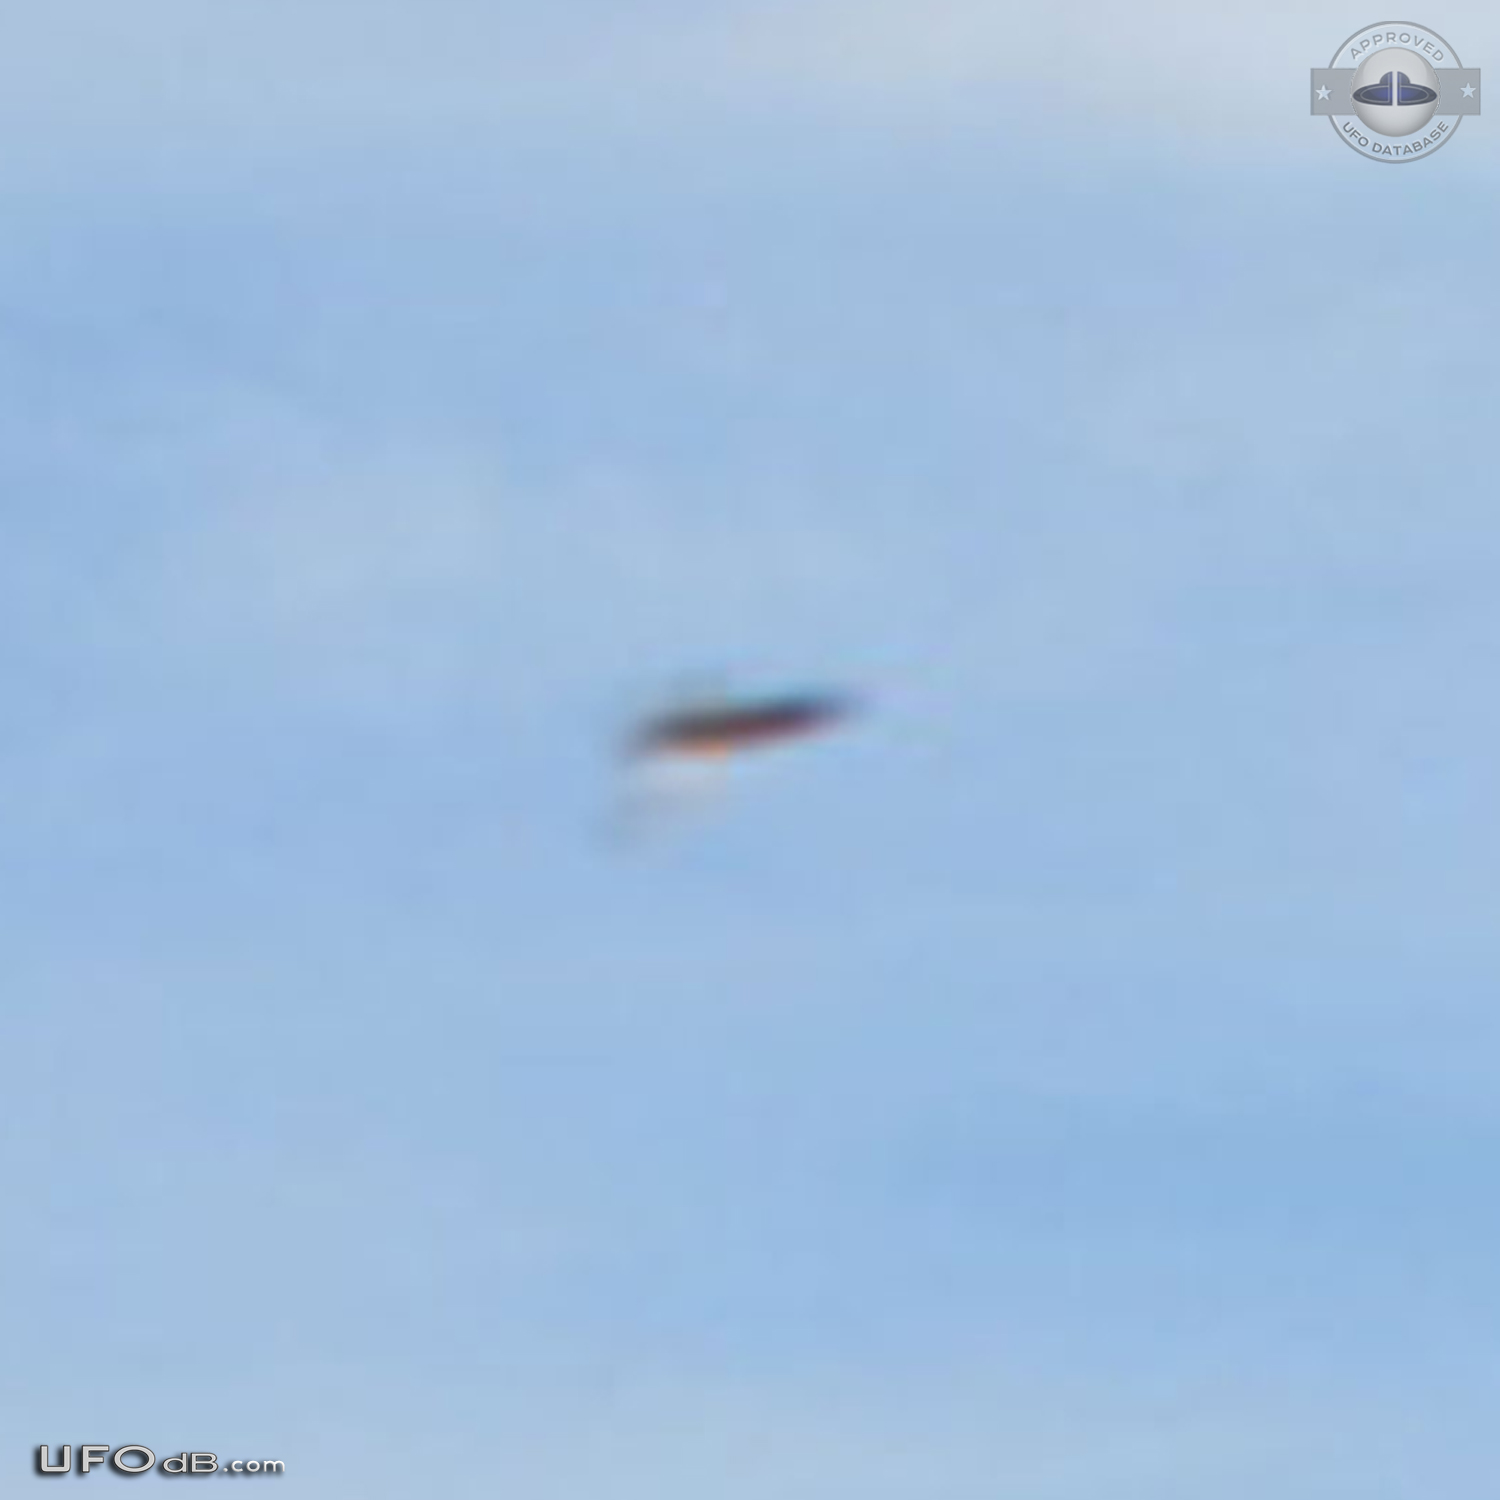 Photo captures passing UFO in Richmond, BC, Canada in August 2012 UFO Picture #474-3